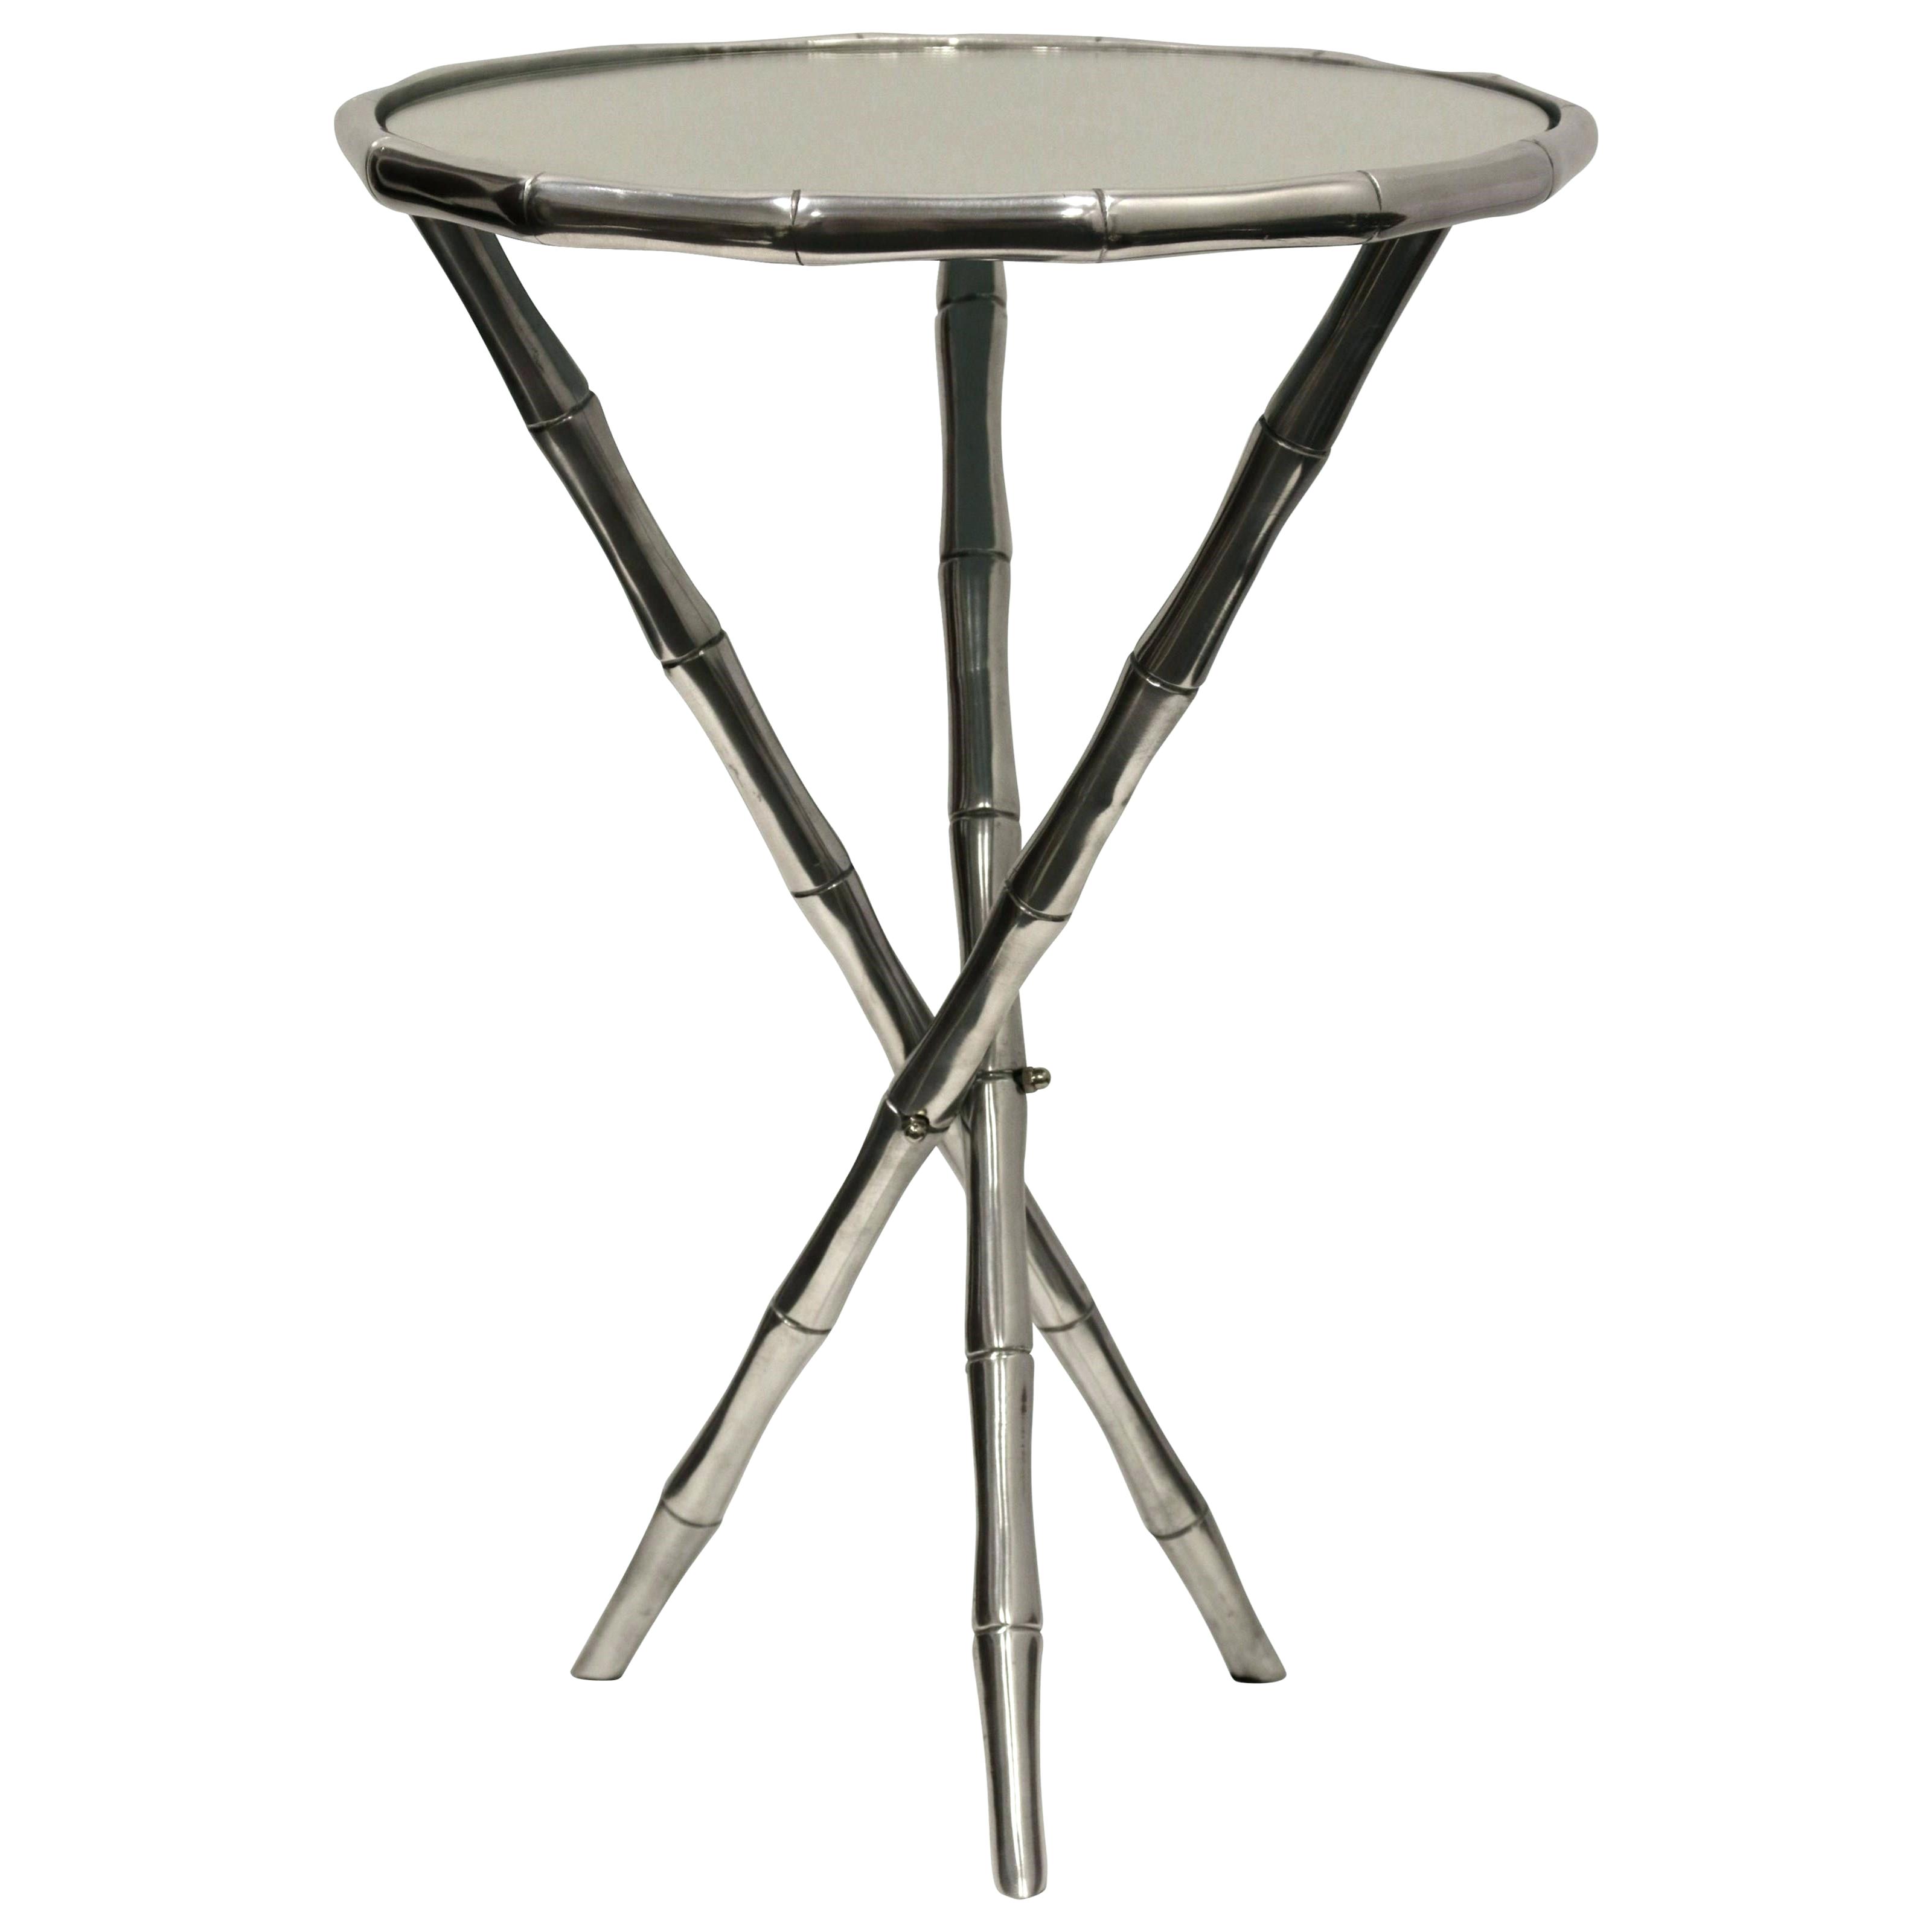 metal accent table with glass top white outdoor rounde end corranade drum target threshold occasional tables round furniture kitchen marvellous roun ceramic full size cube storage